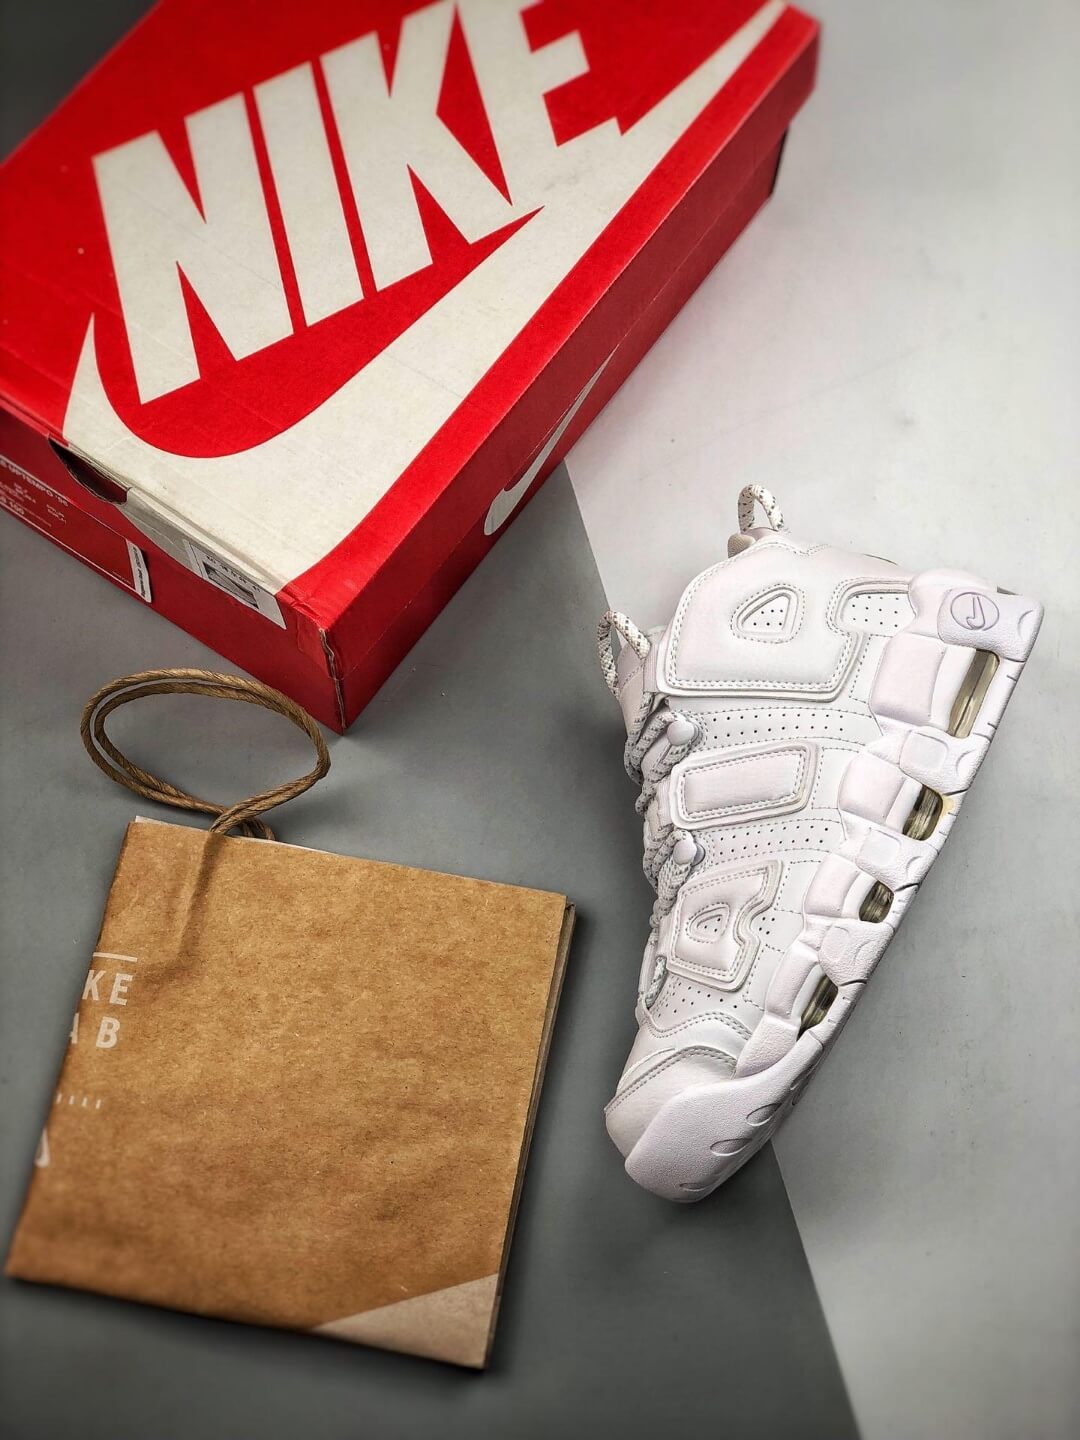 The Air More Uptempo 'Triple White' All 